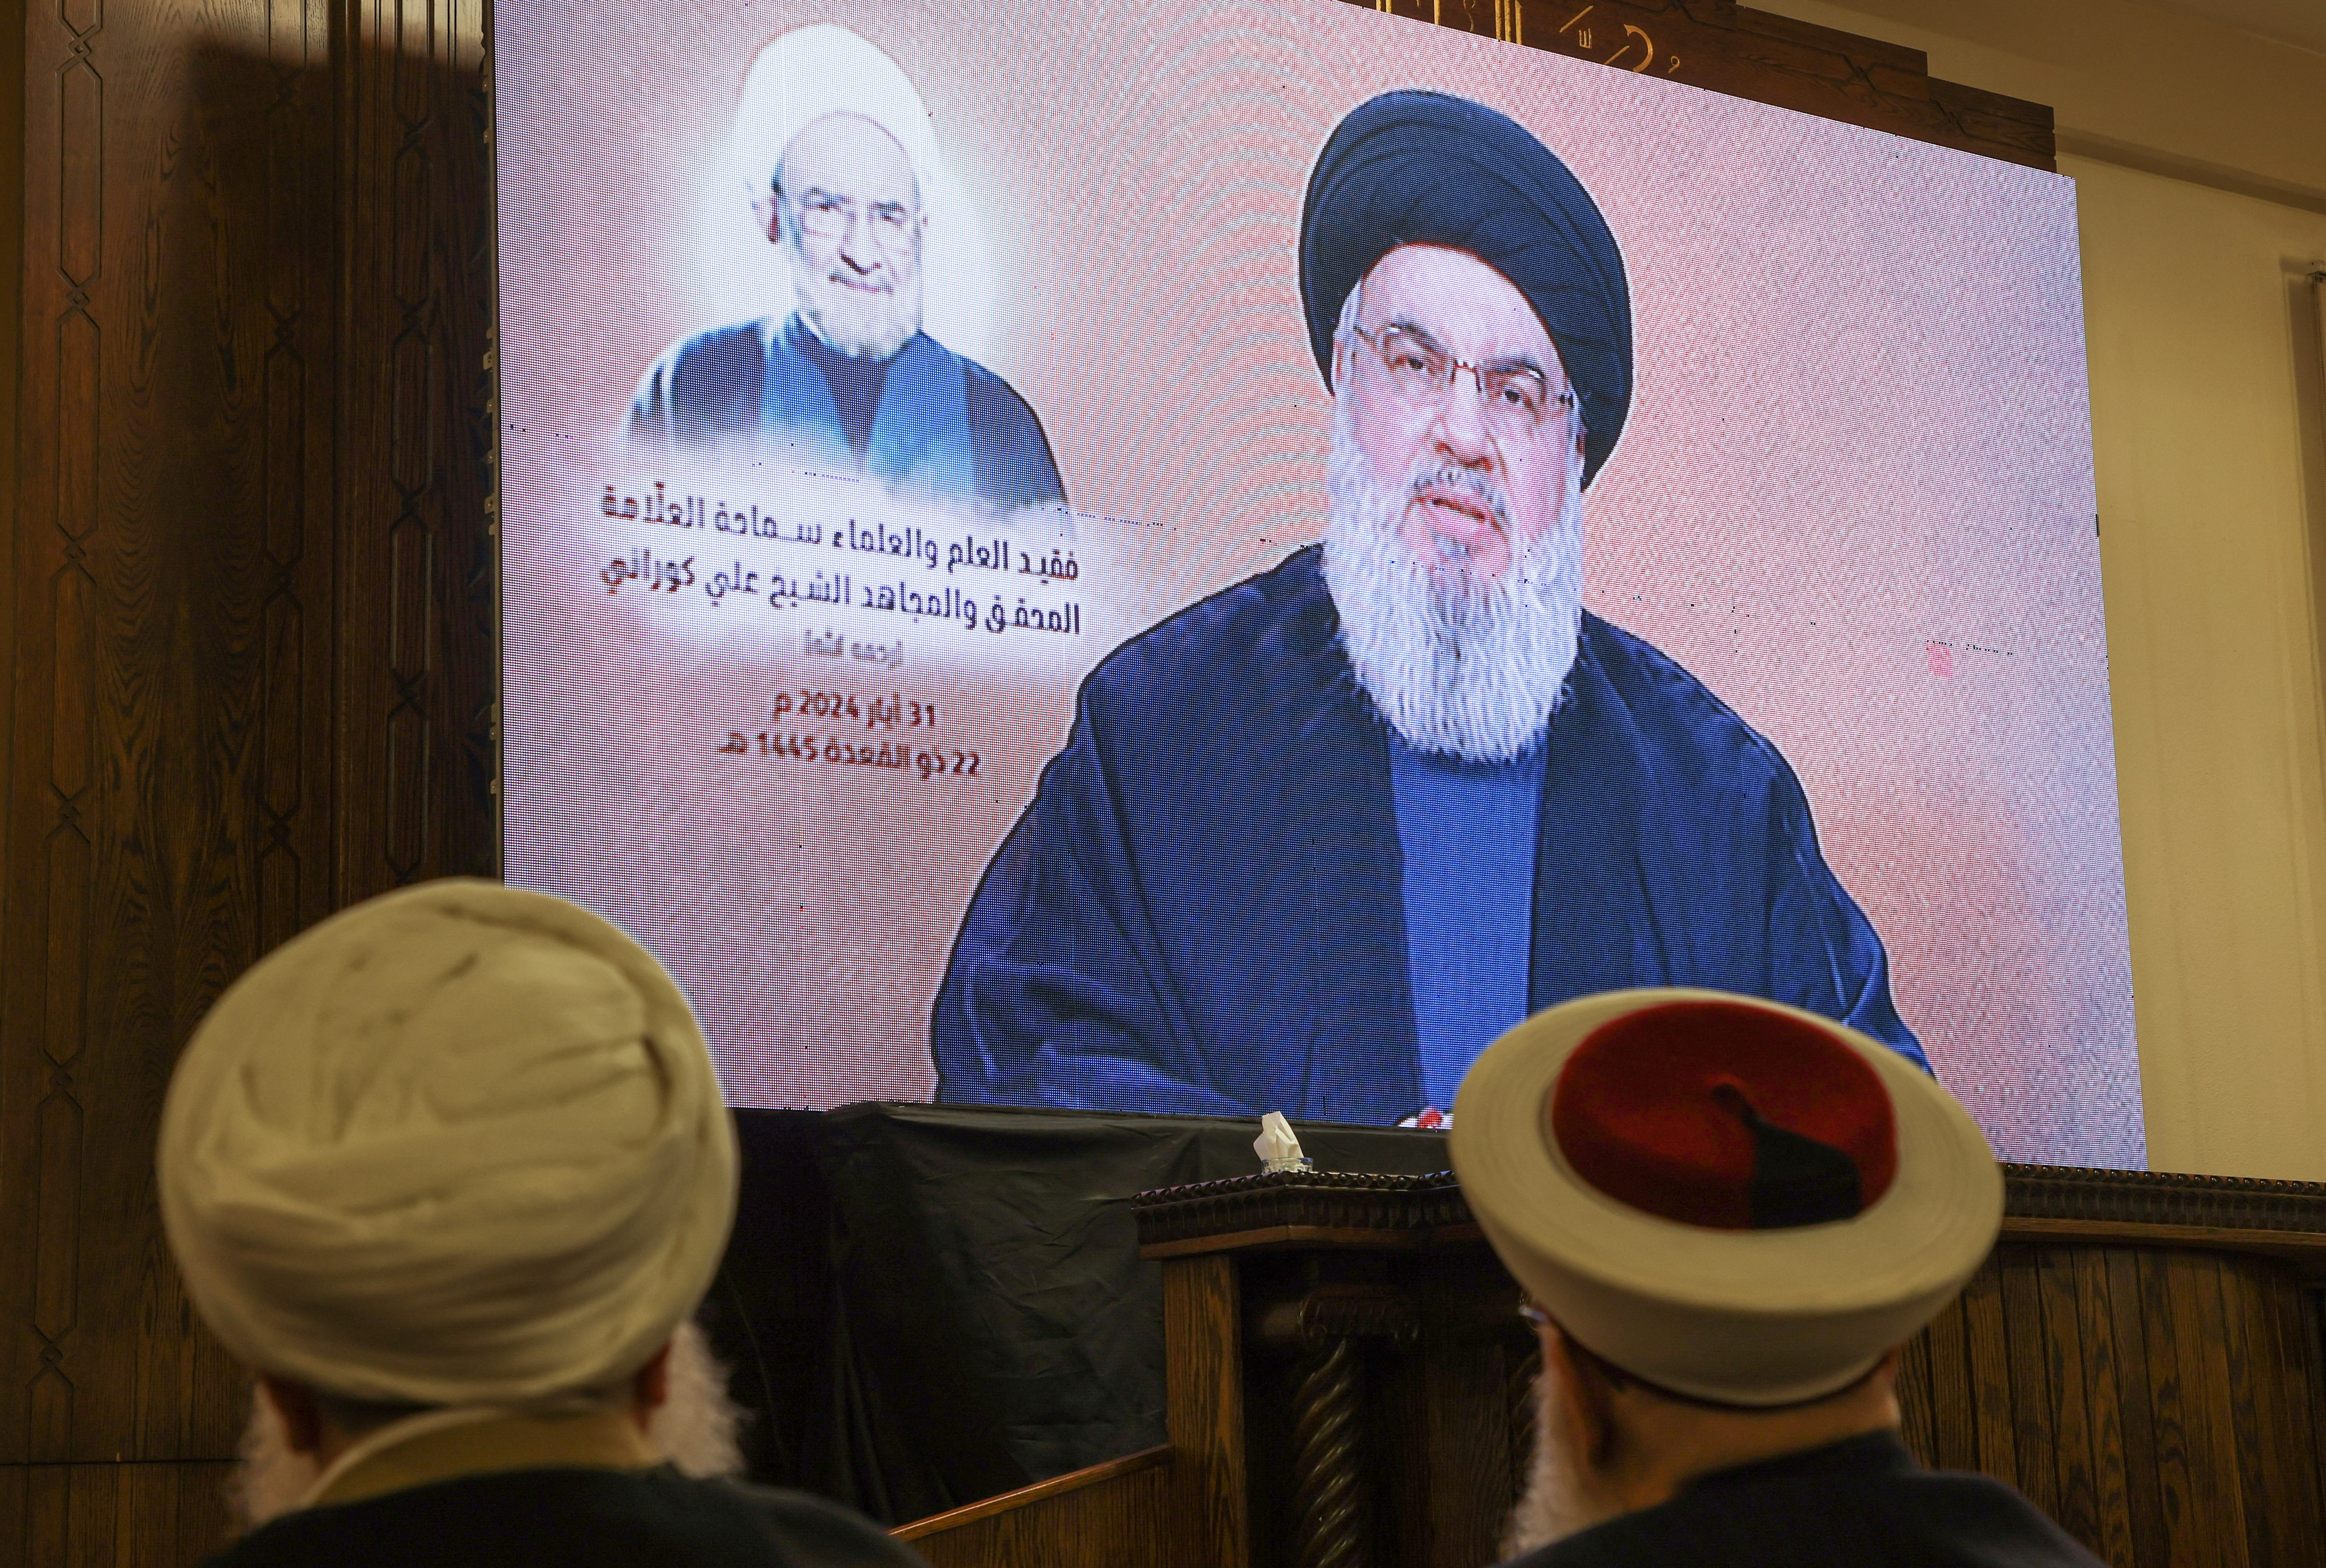 Europeans fear Middle East on brink after “unacceptable” Hezbollah threats